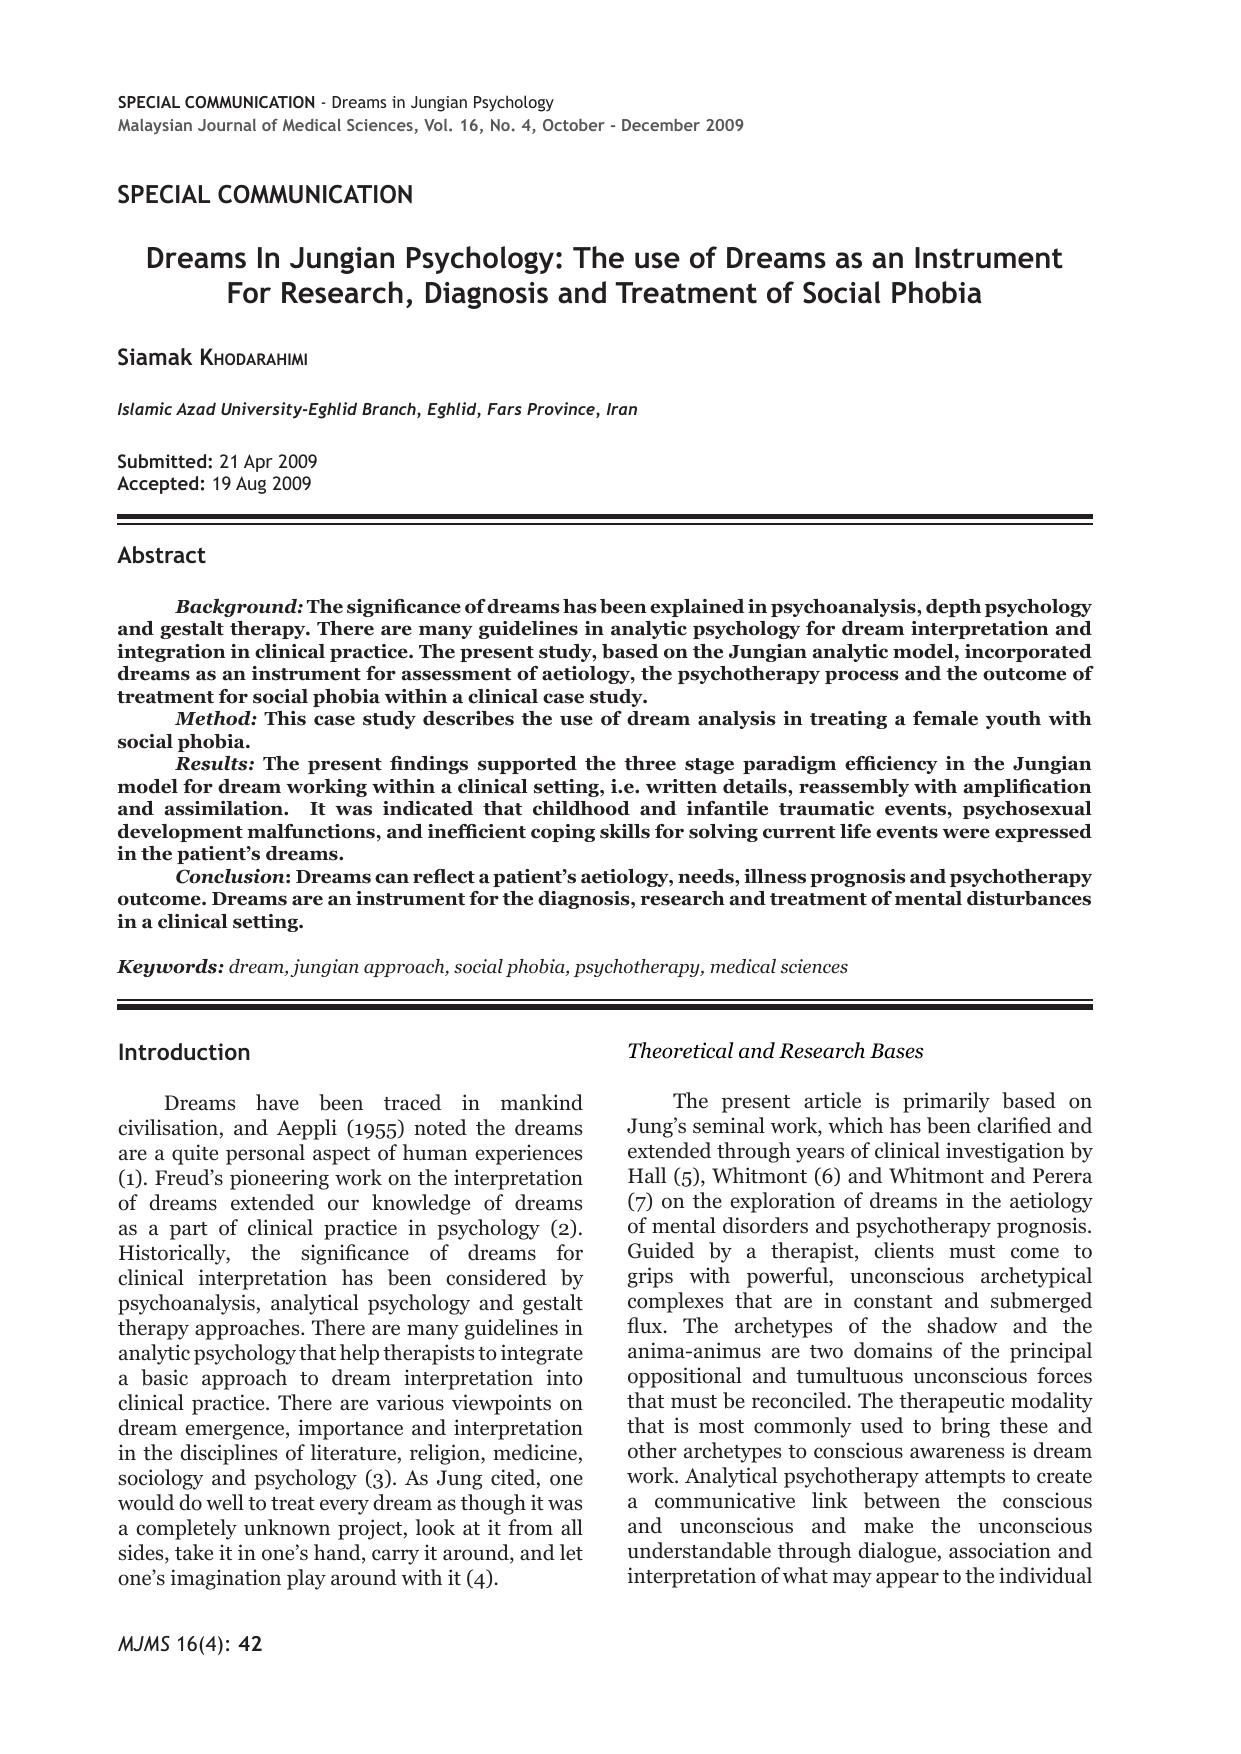 Dreams In Jungian Psychology: The use of Dreams as an Instrument  For Research, Diagnosis and Treatment of Social Phobia - Paper